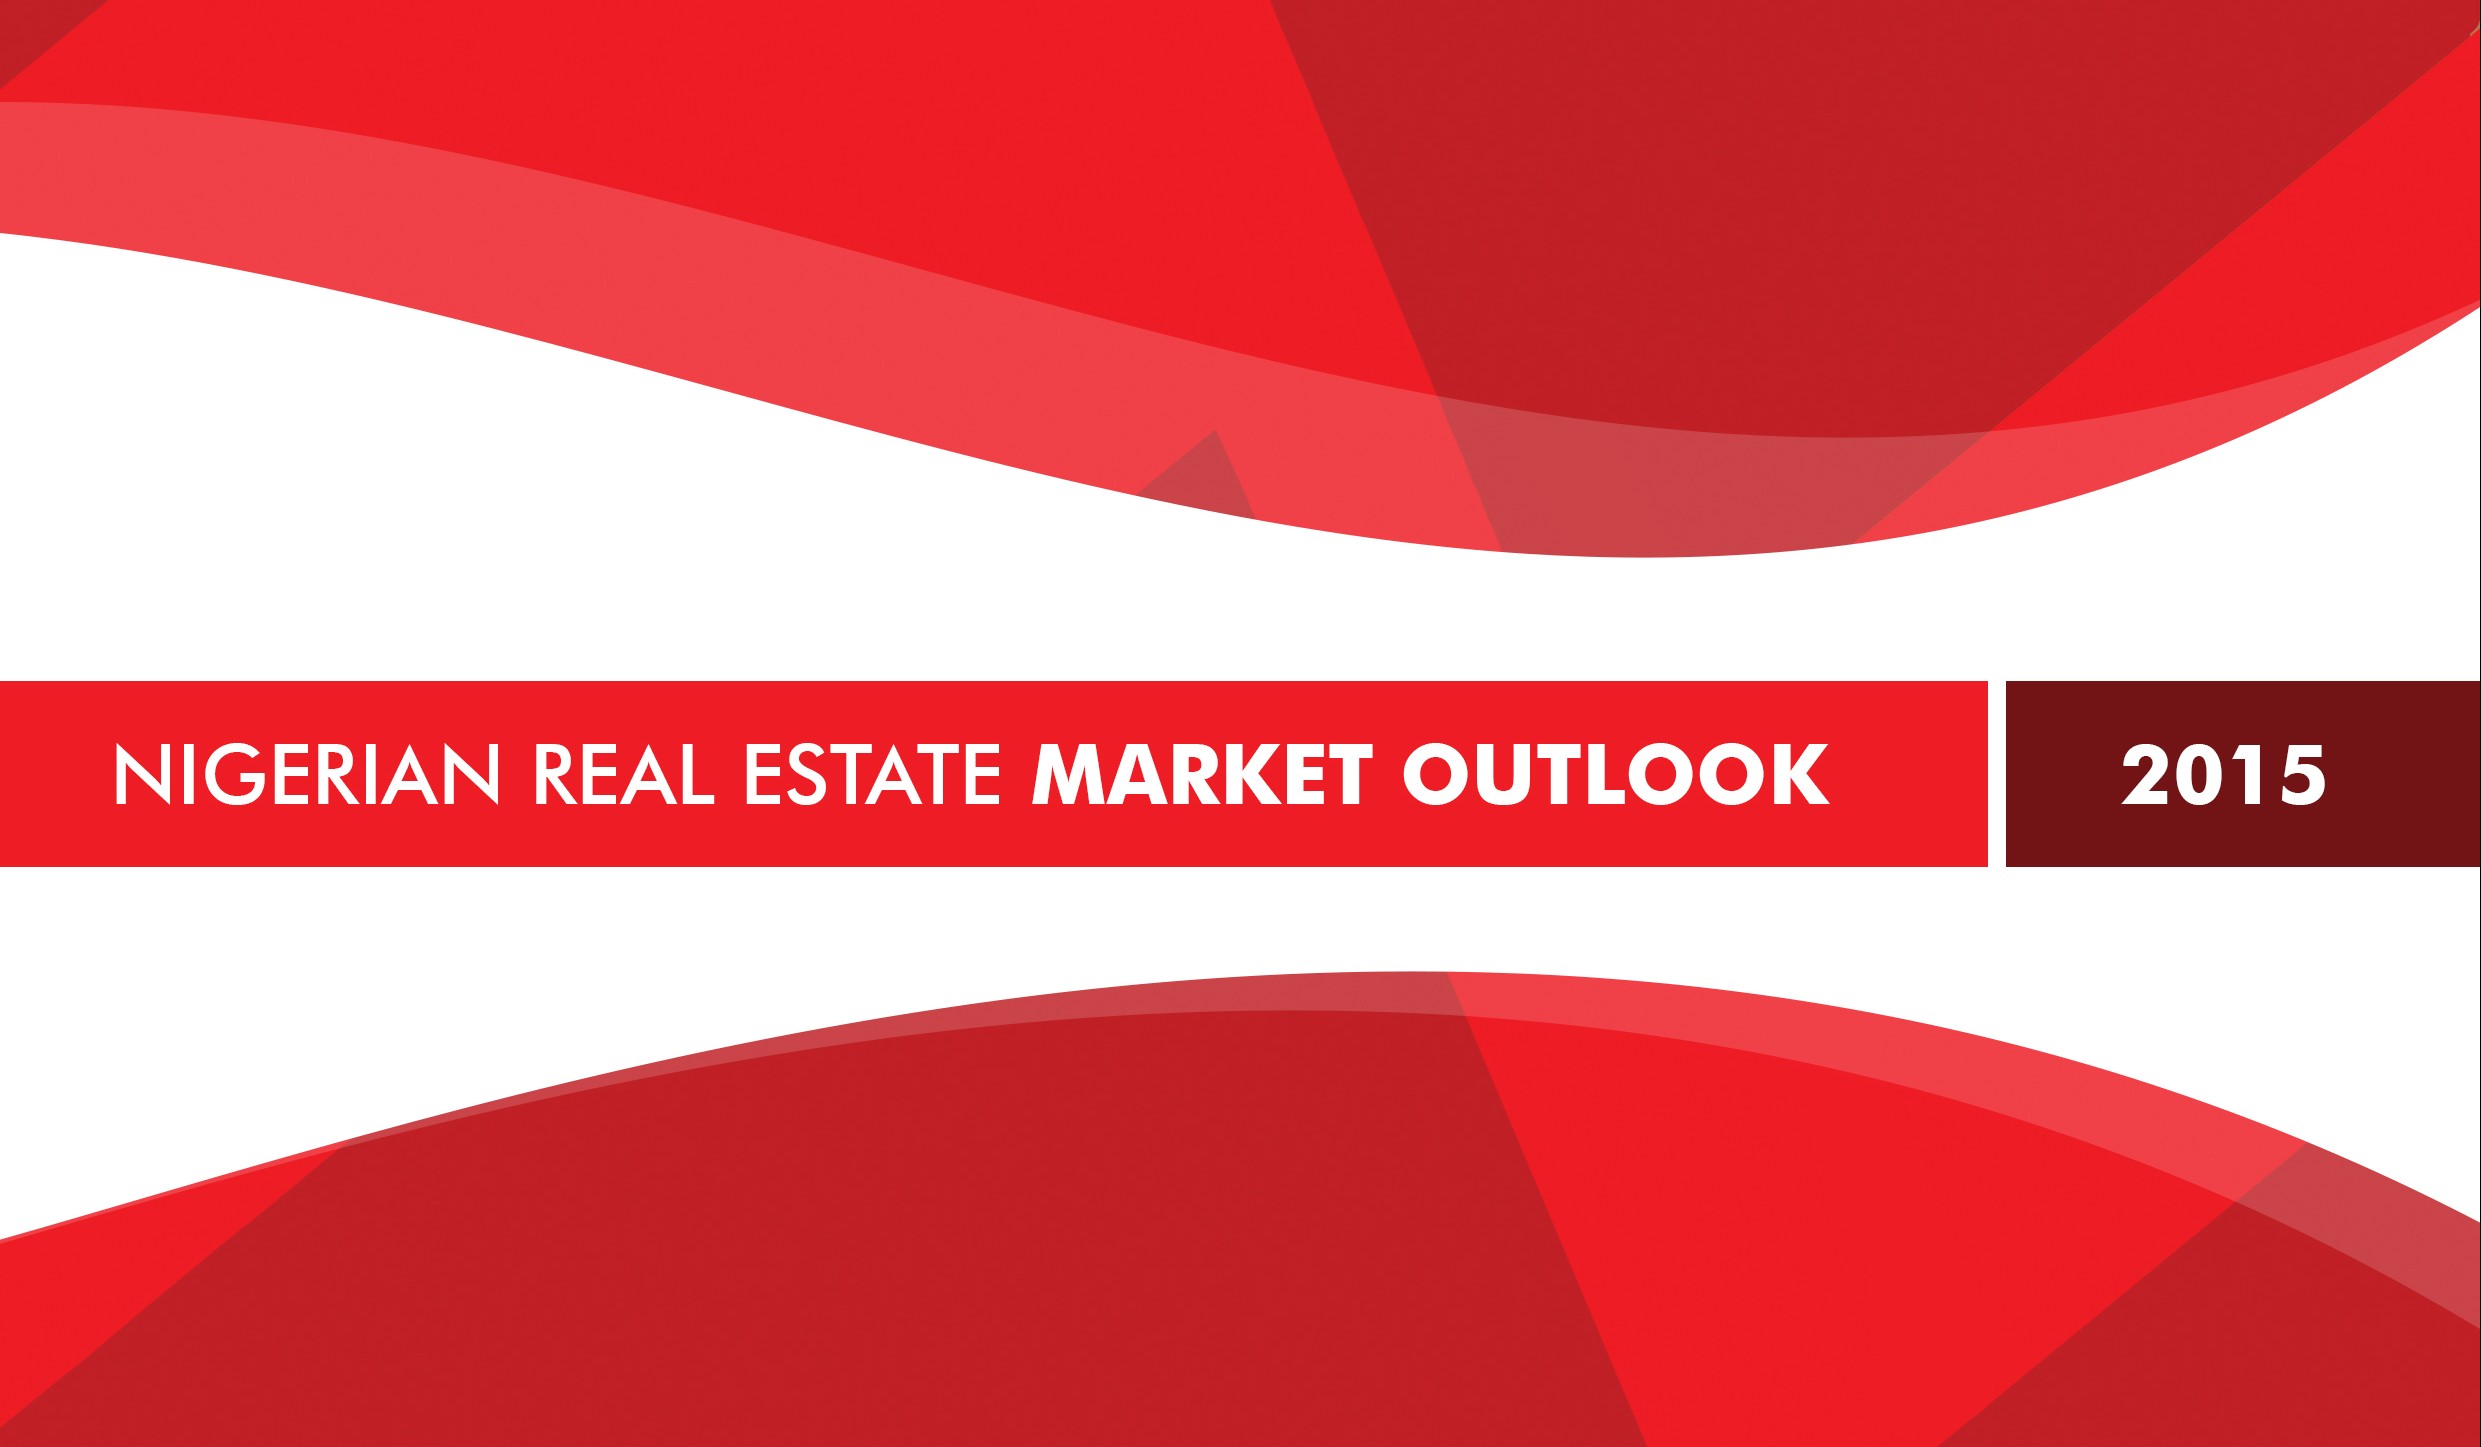 Nigerian Real Estate Market: 2014 Overview and 2015 Outlook